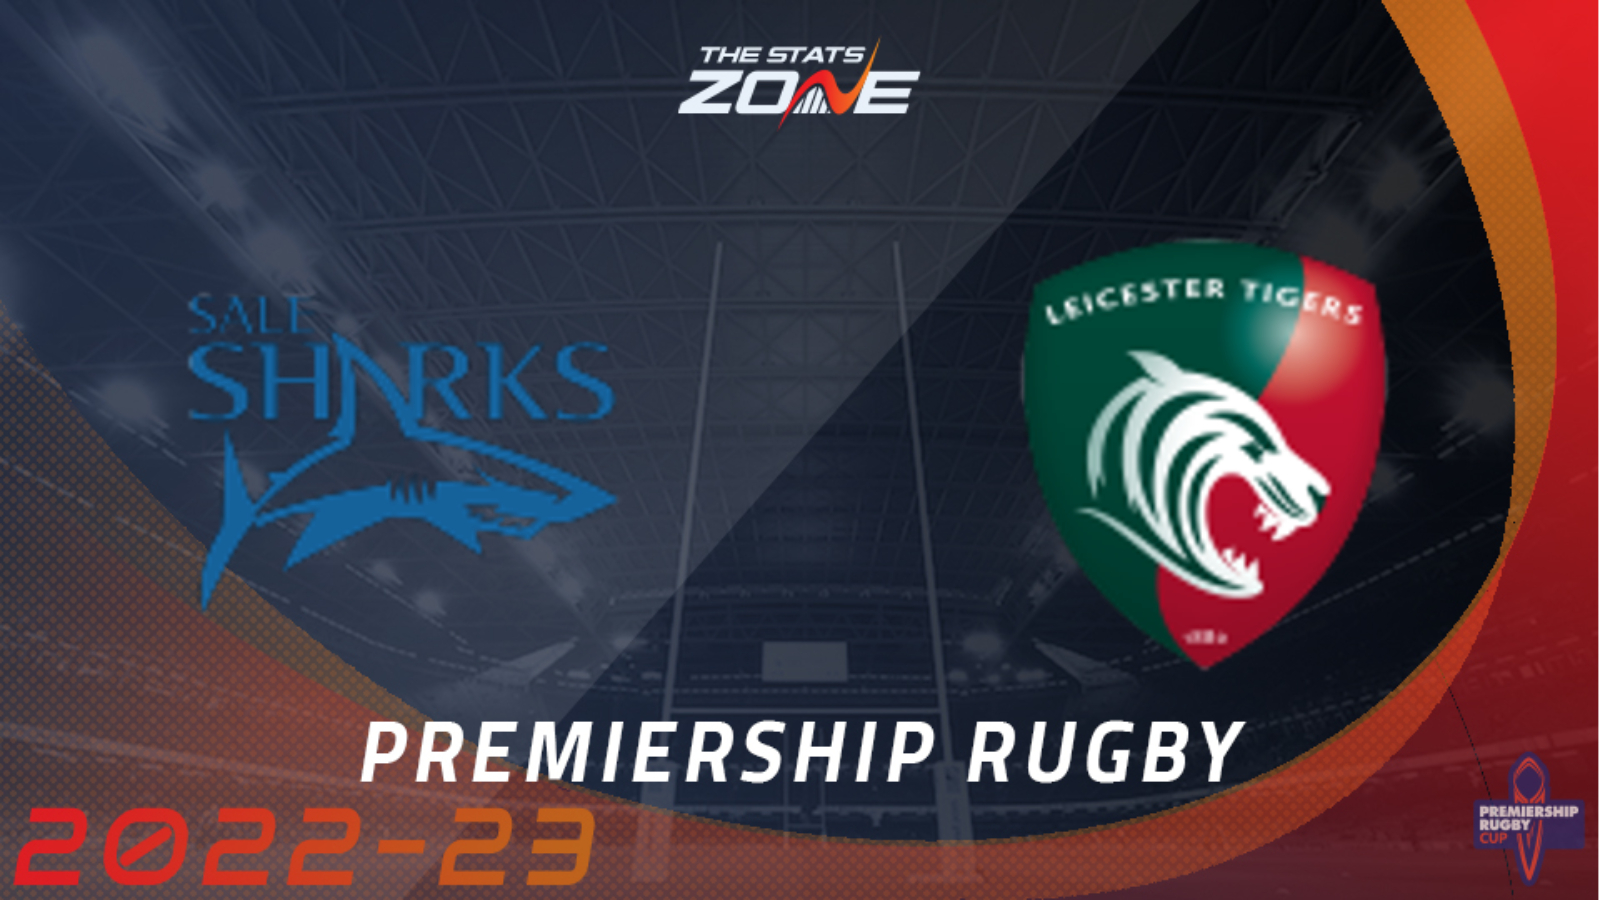 Sale Sharks vs Leicester Tigers – Round 14